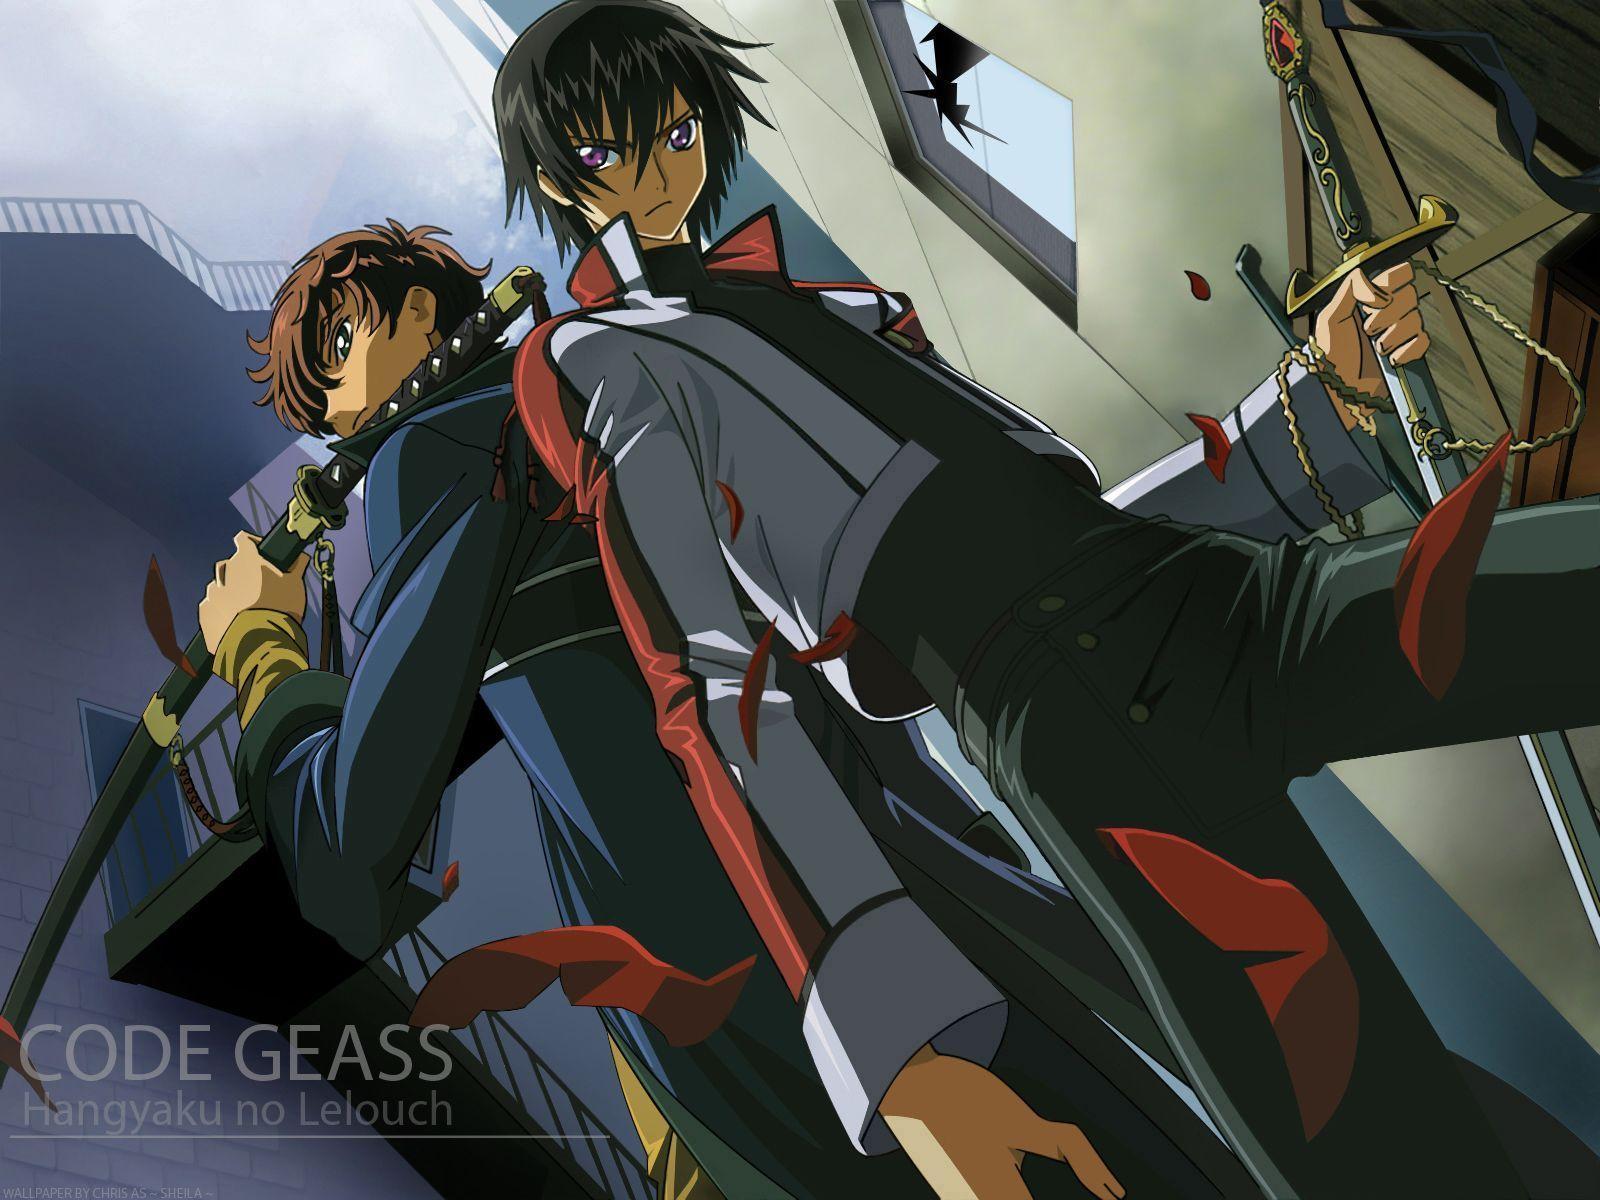 Code Geass Lelouch Wallpaper Image & Picture